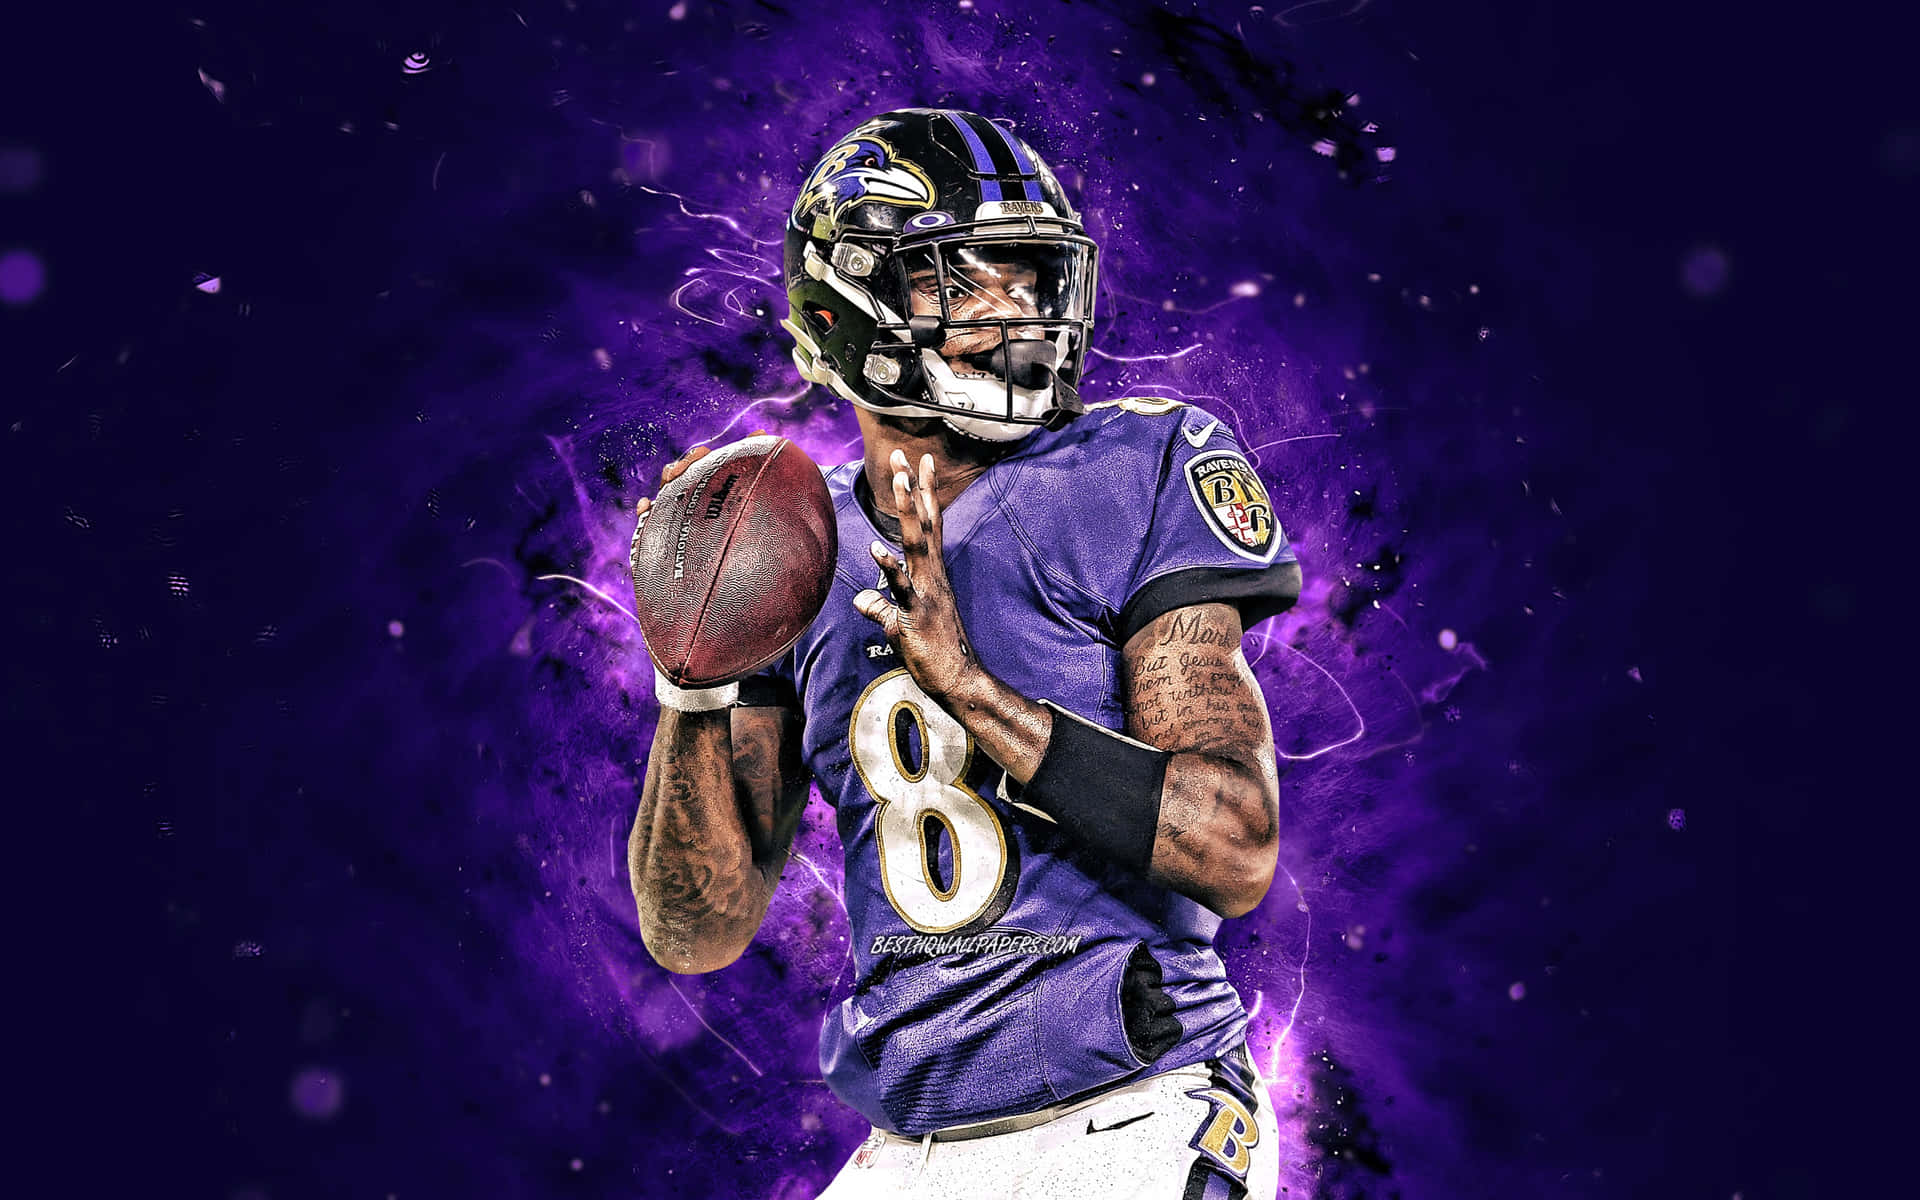 The Baltimore Ravens, An Exciting and Fearless NFL Team